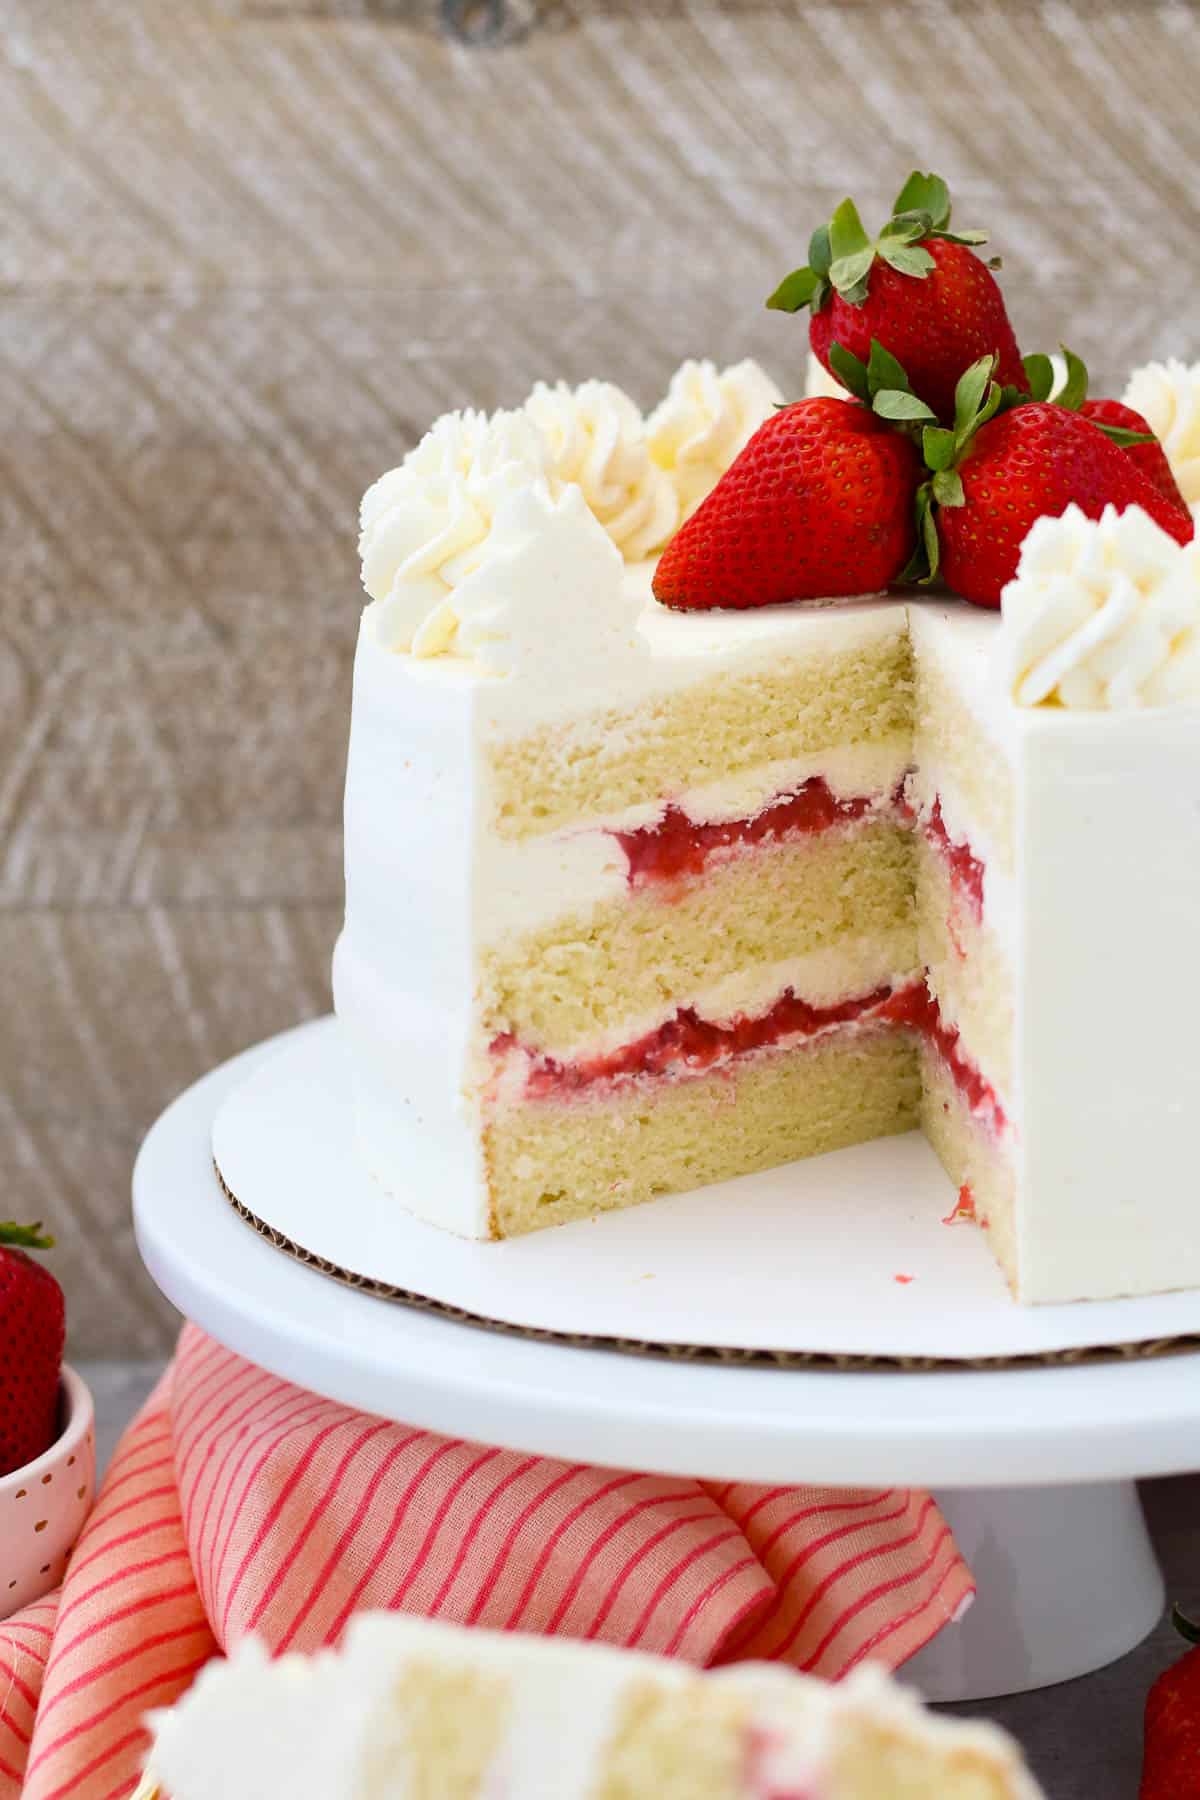 A frosted strawberry mascarpone cake topped with frosting swirls and fresh strawberries on a cake stand, with a slice missing.